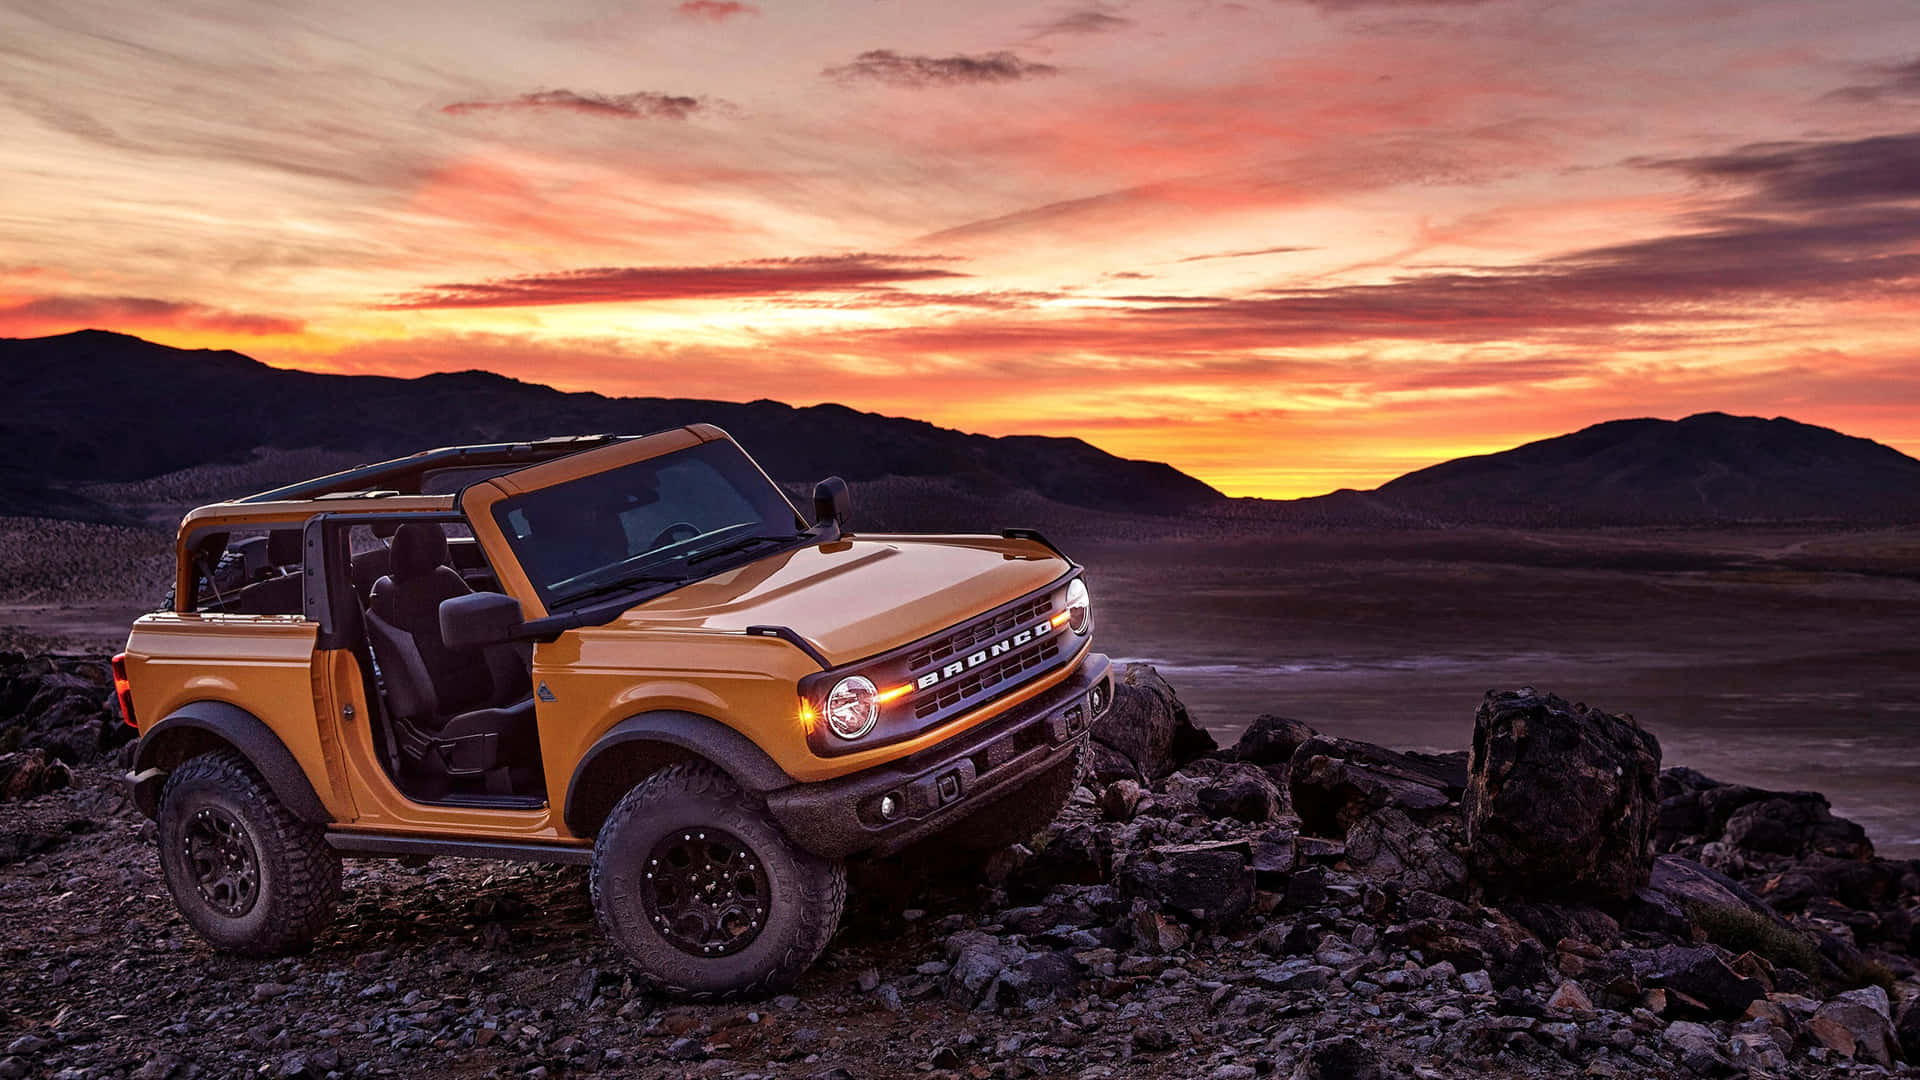 Driving with Purpose: The Ford Bronco